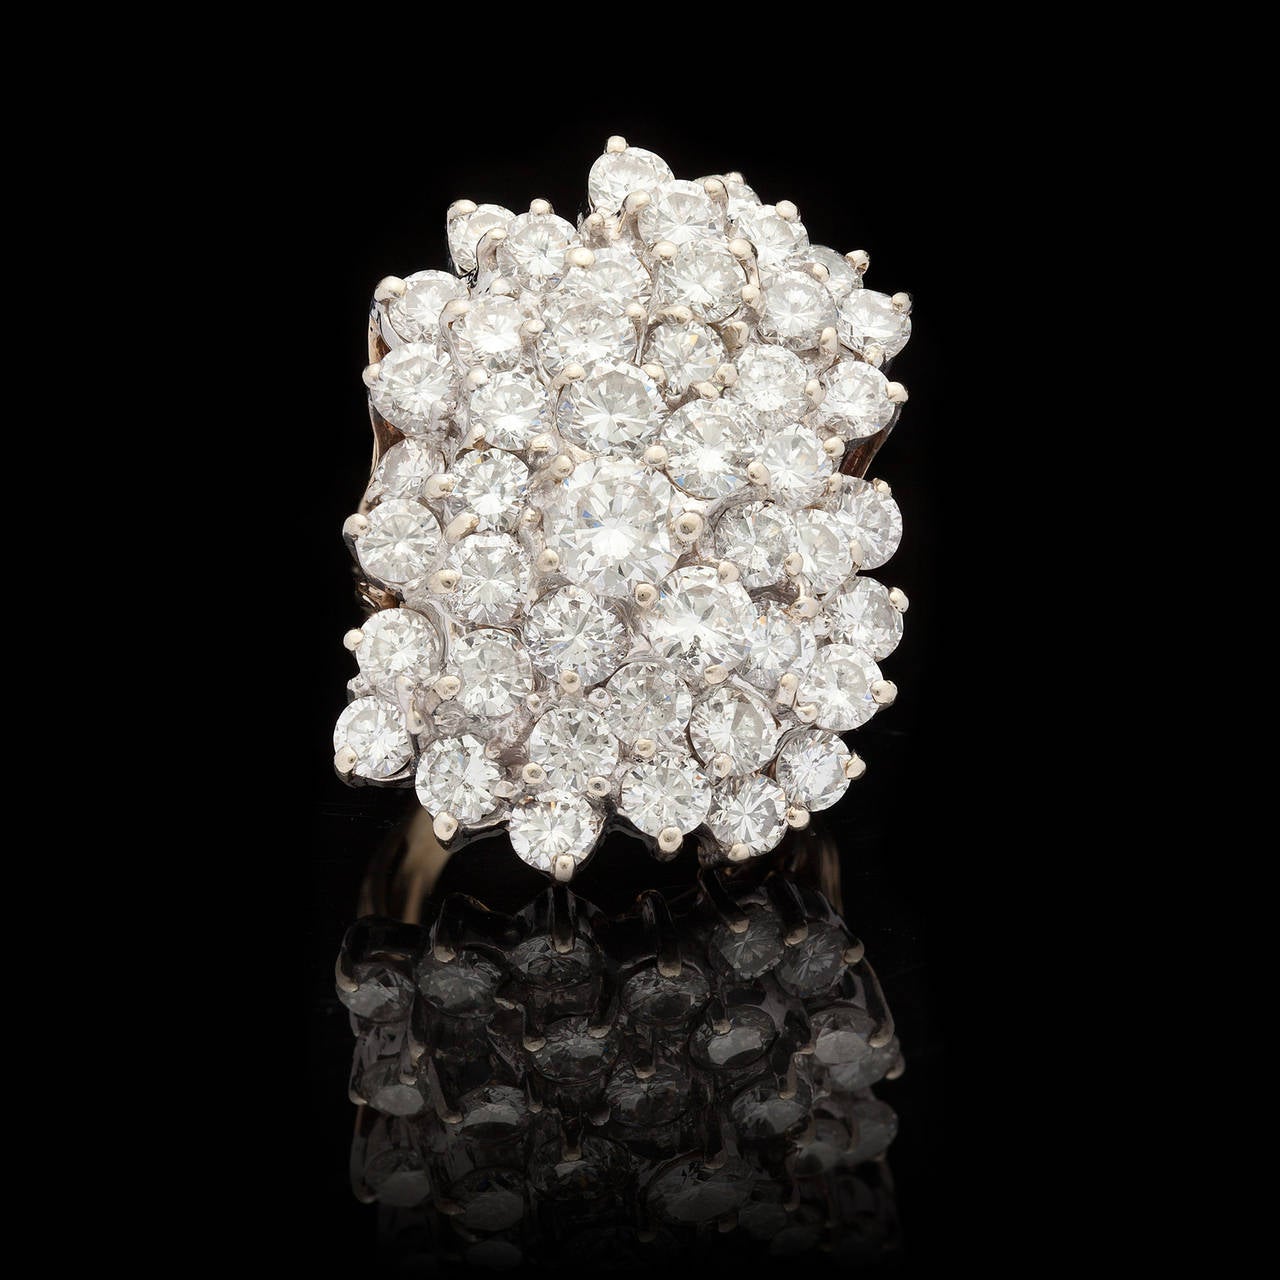 Estate Ring Features 47 Round Brilliant Cut Diamonds in a Multidimensional Cluster Measuring 32.5mm x 24.0mm. The ring is a size 6.5 with a total weight of 19.8 grams.